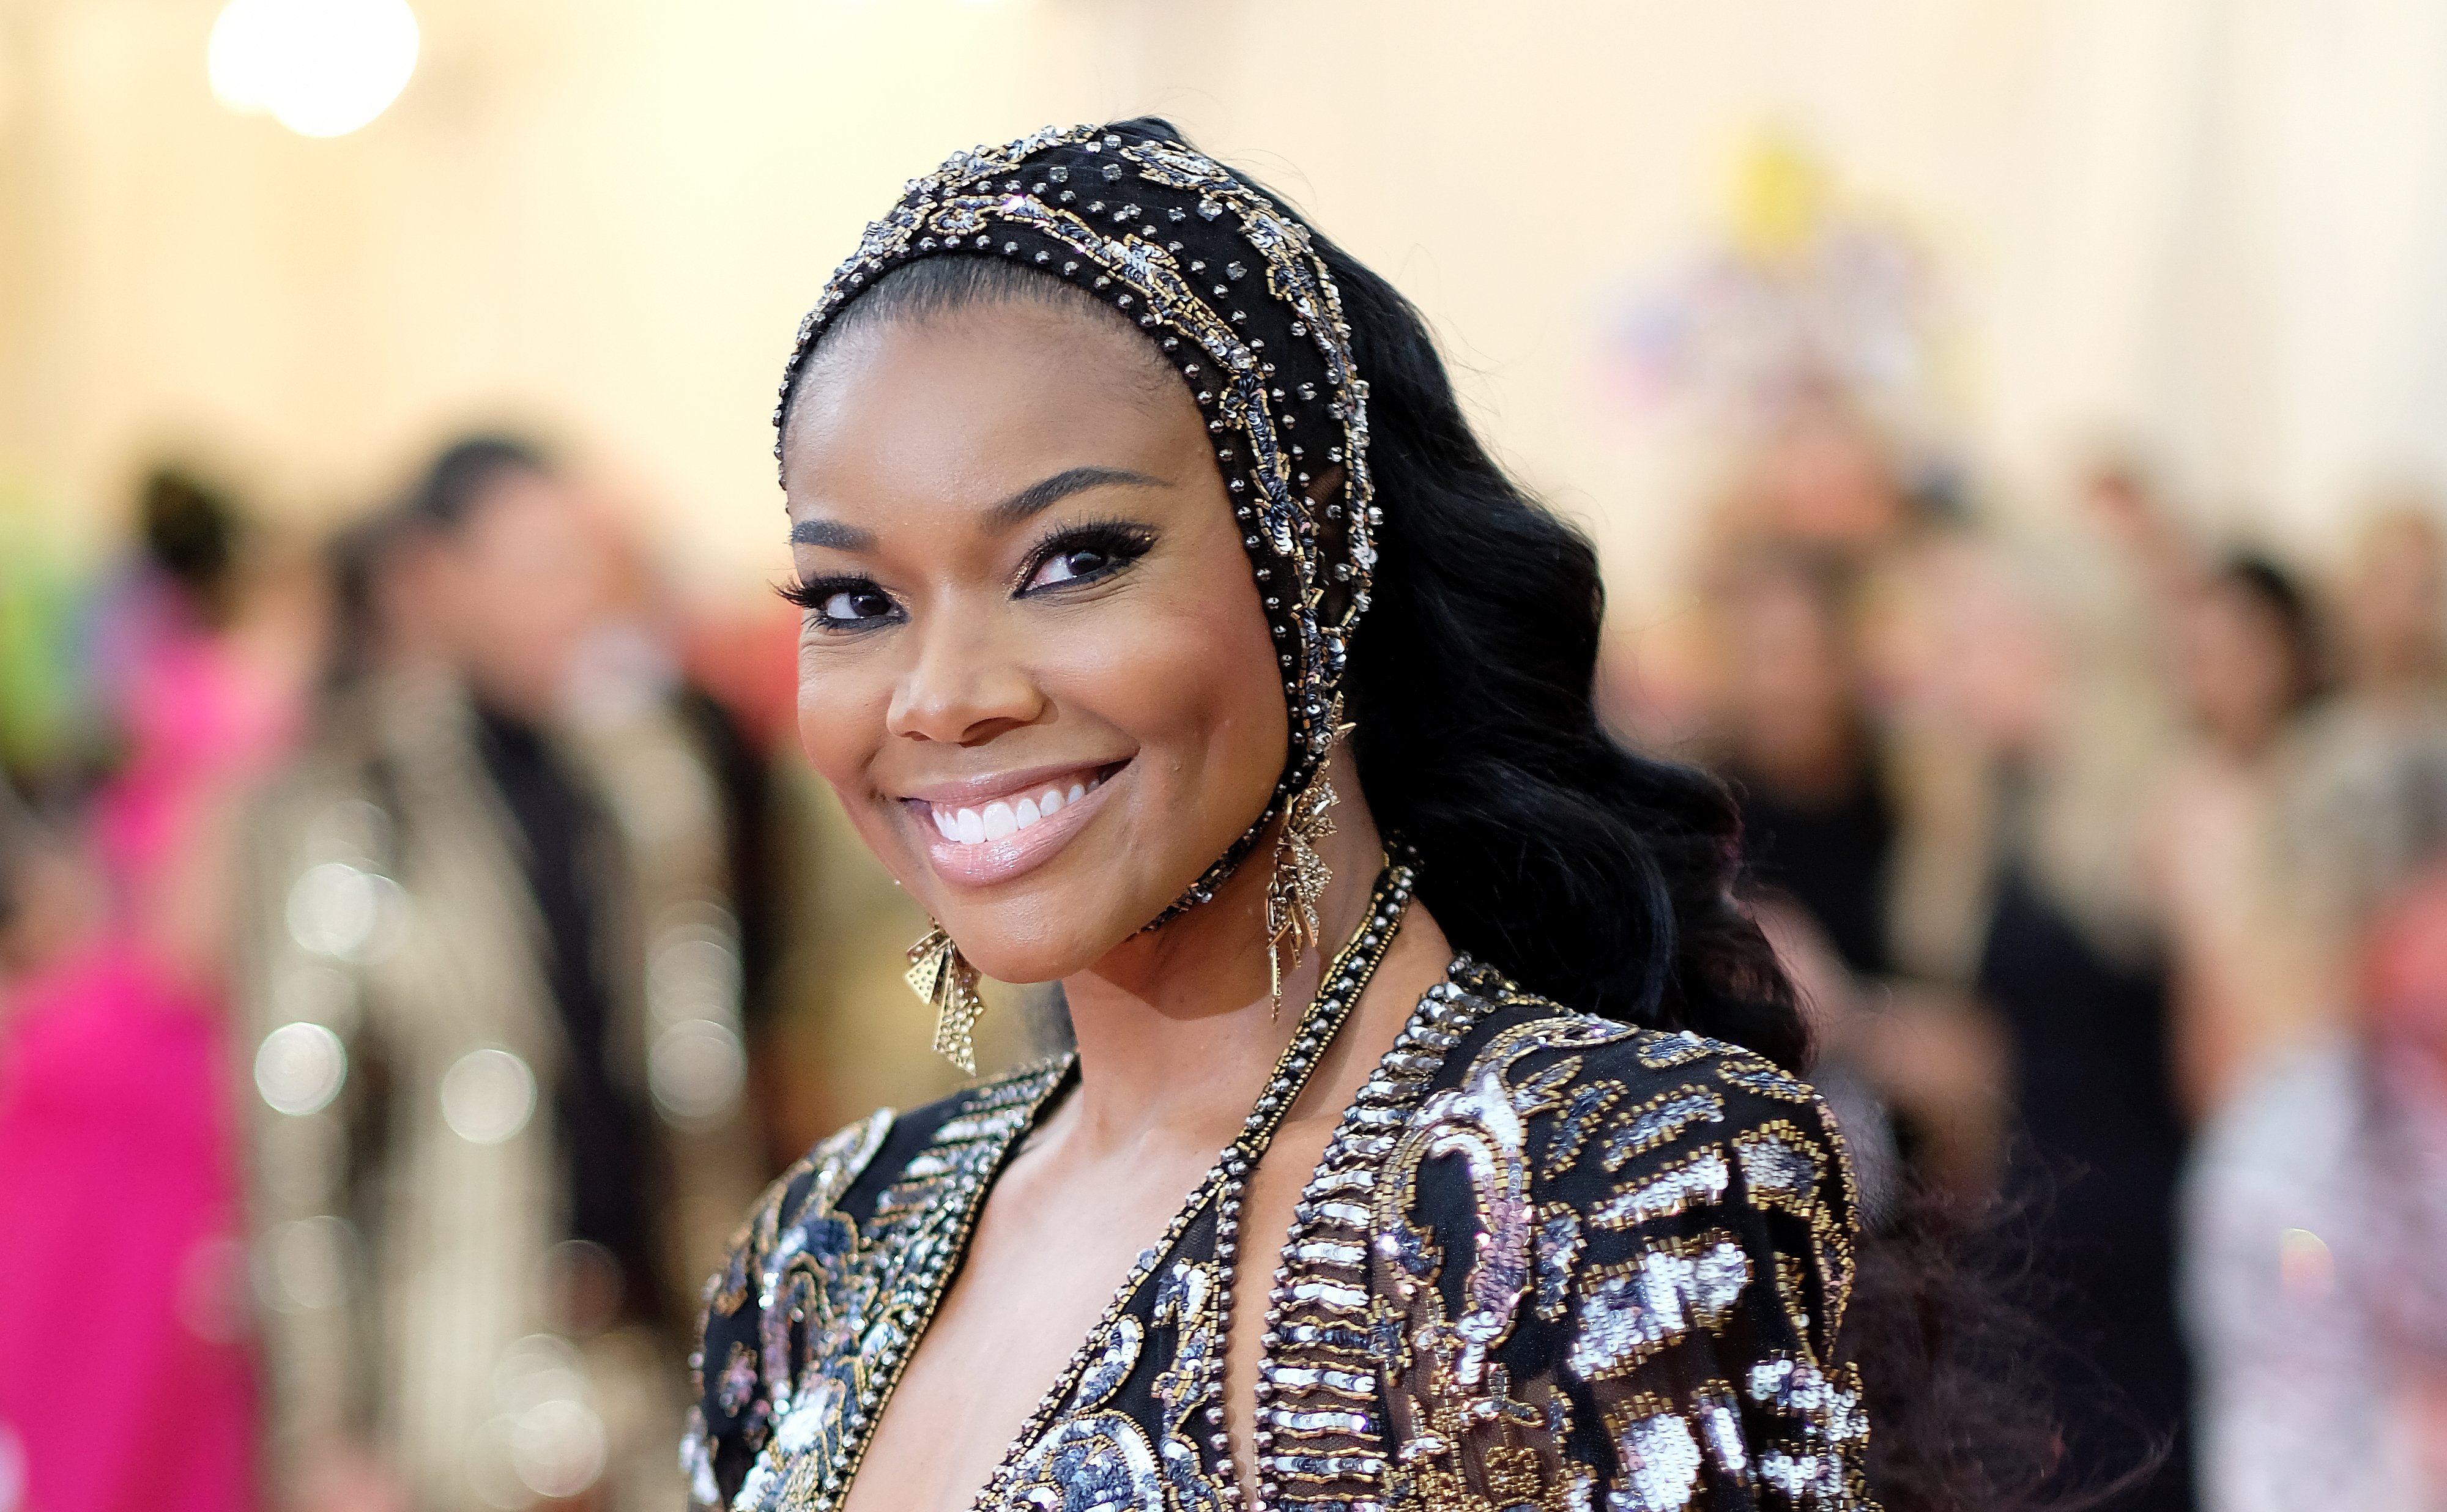 Gabrielle Union at the 2019 Met Gala at the Metropolitan Museum of Art on May 06, 2019. | Photo: Getty Images